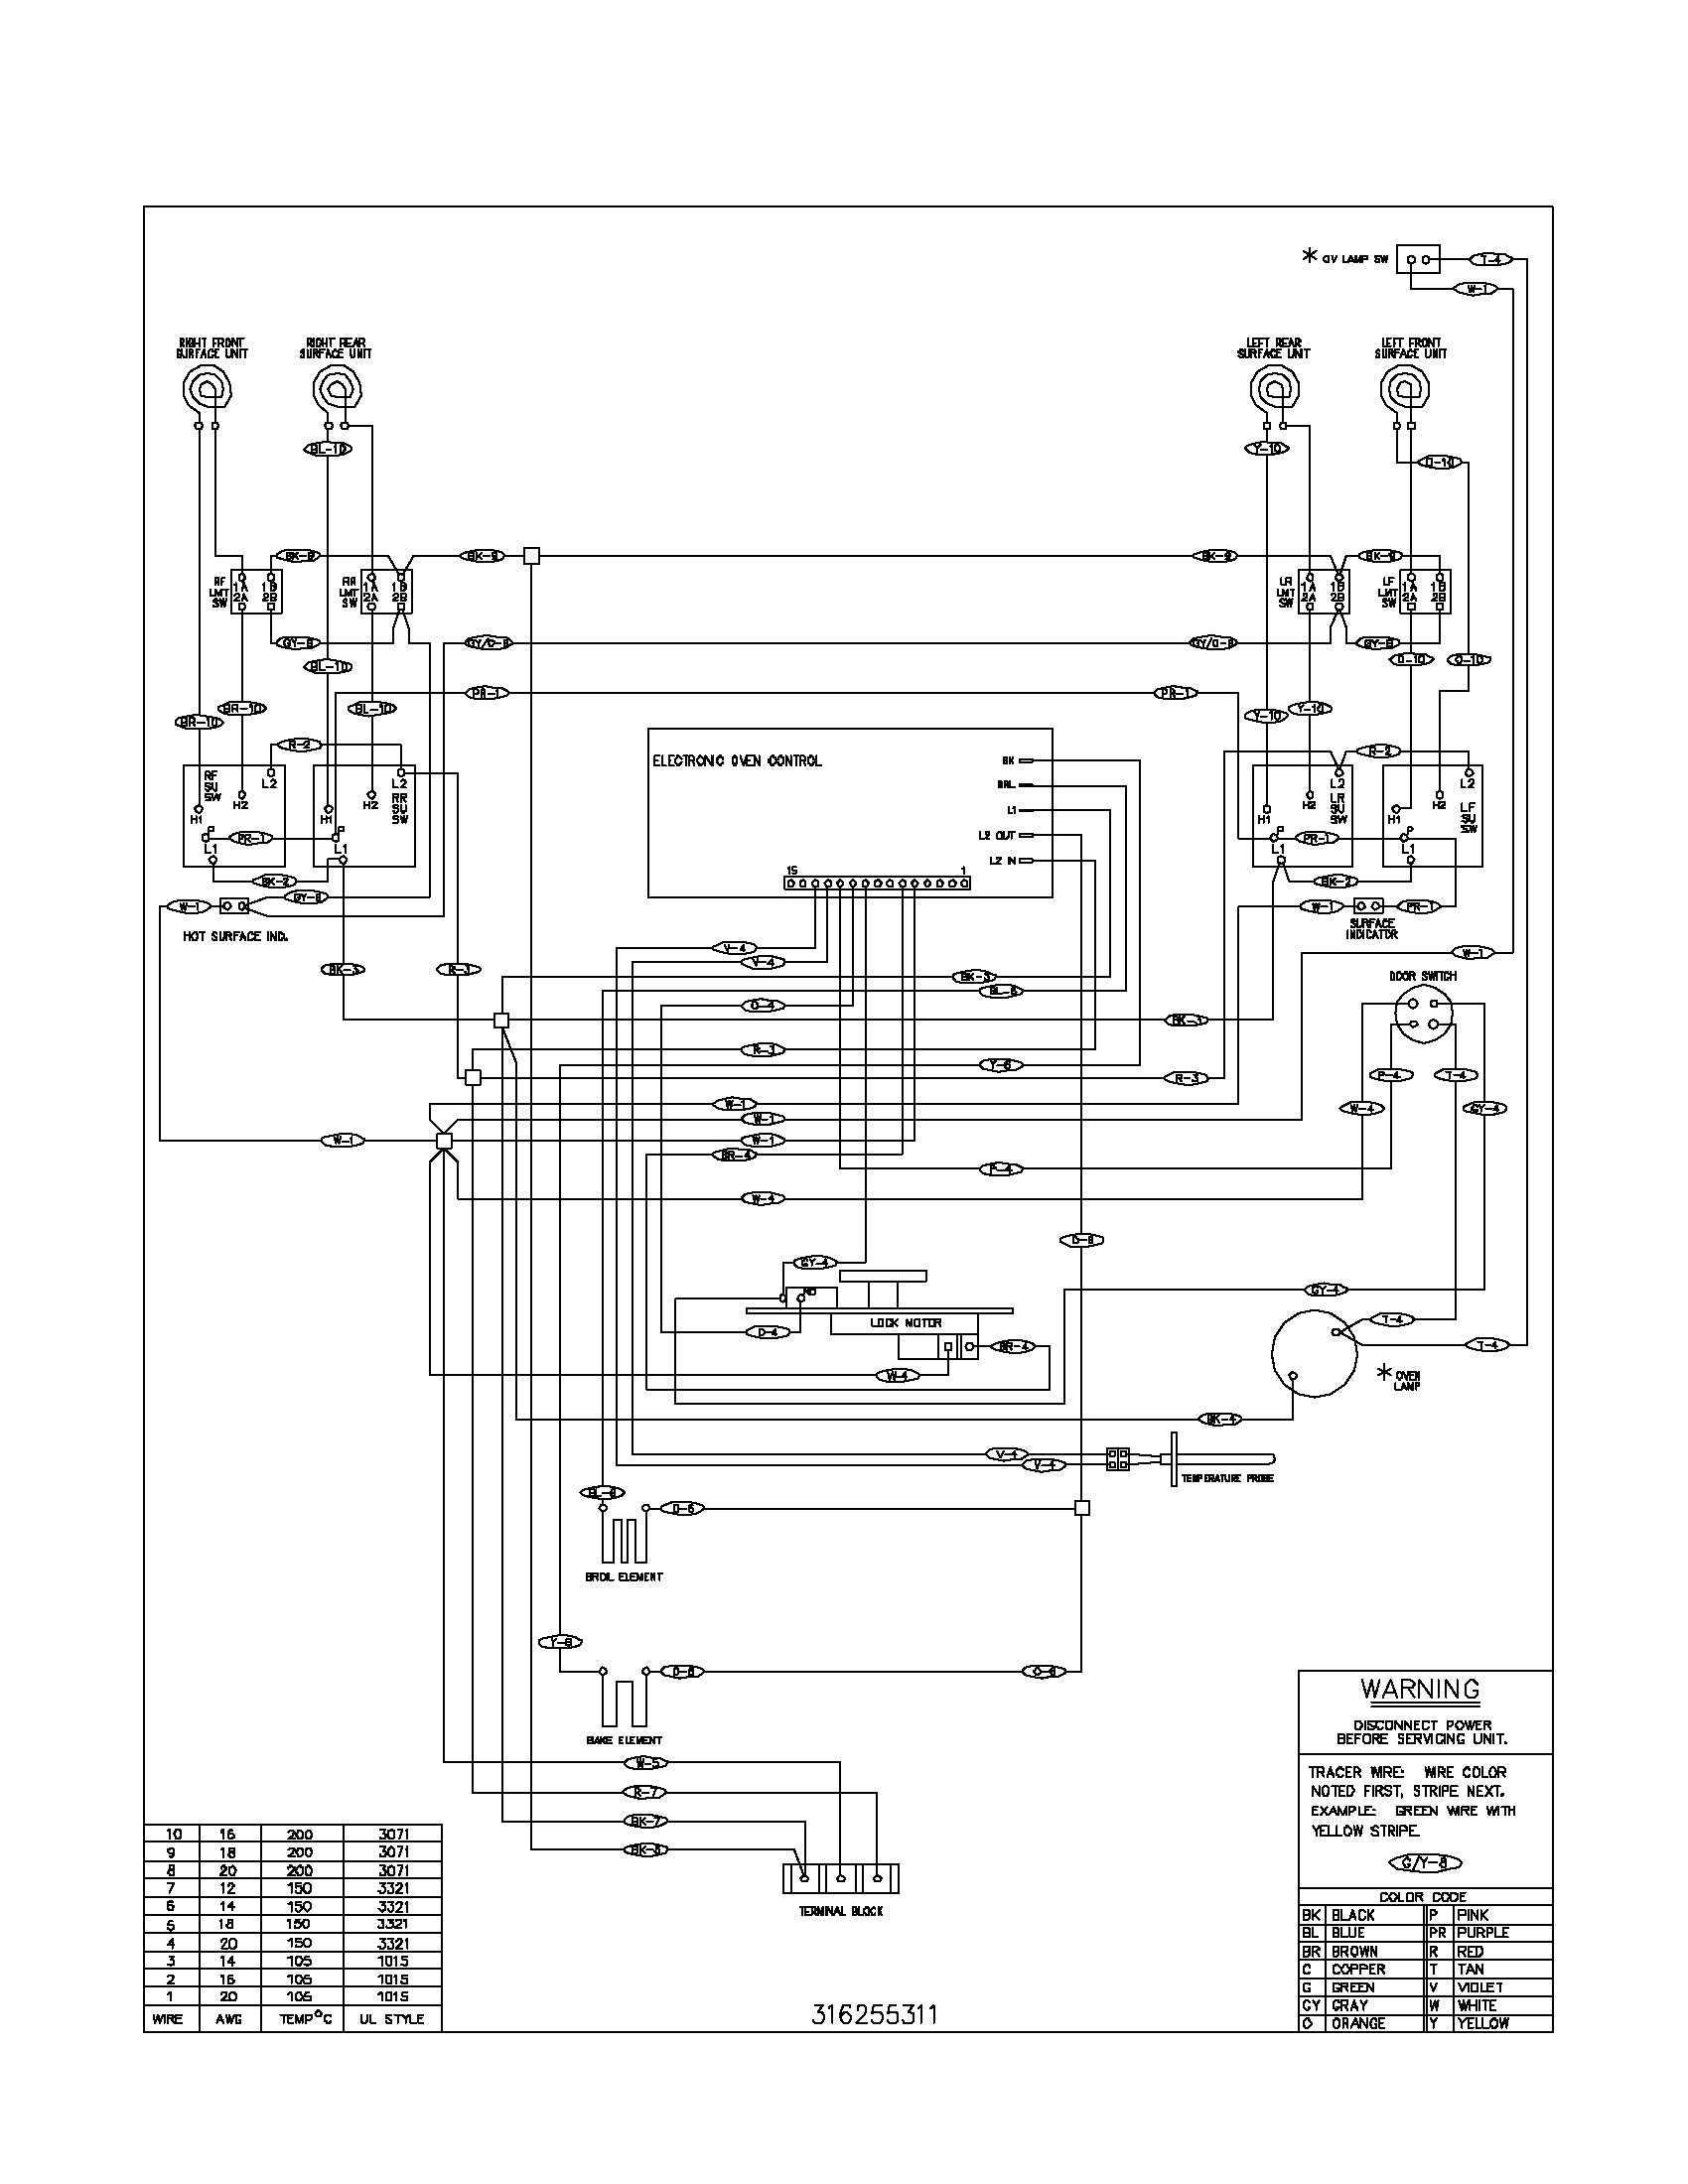 Wiring Diagram For Electric Stove New Electric Range Wiring Diagram